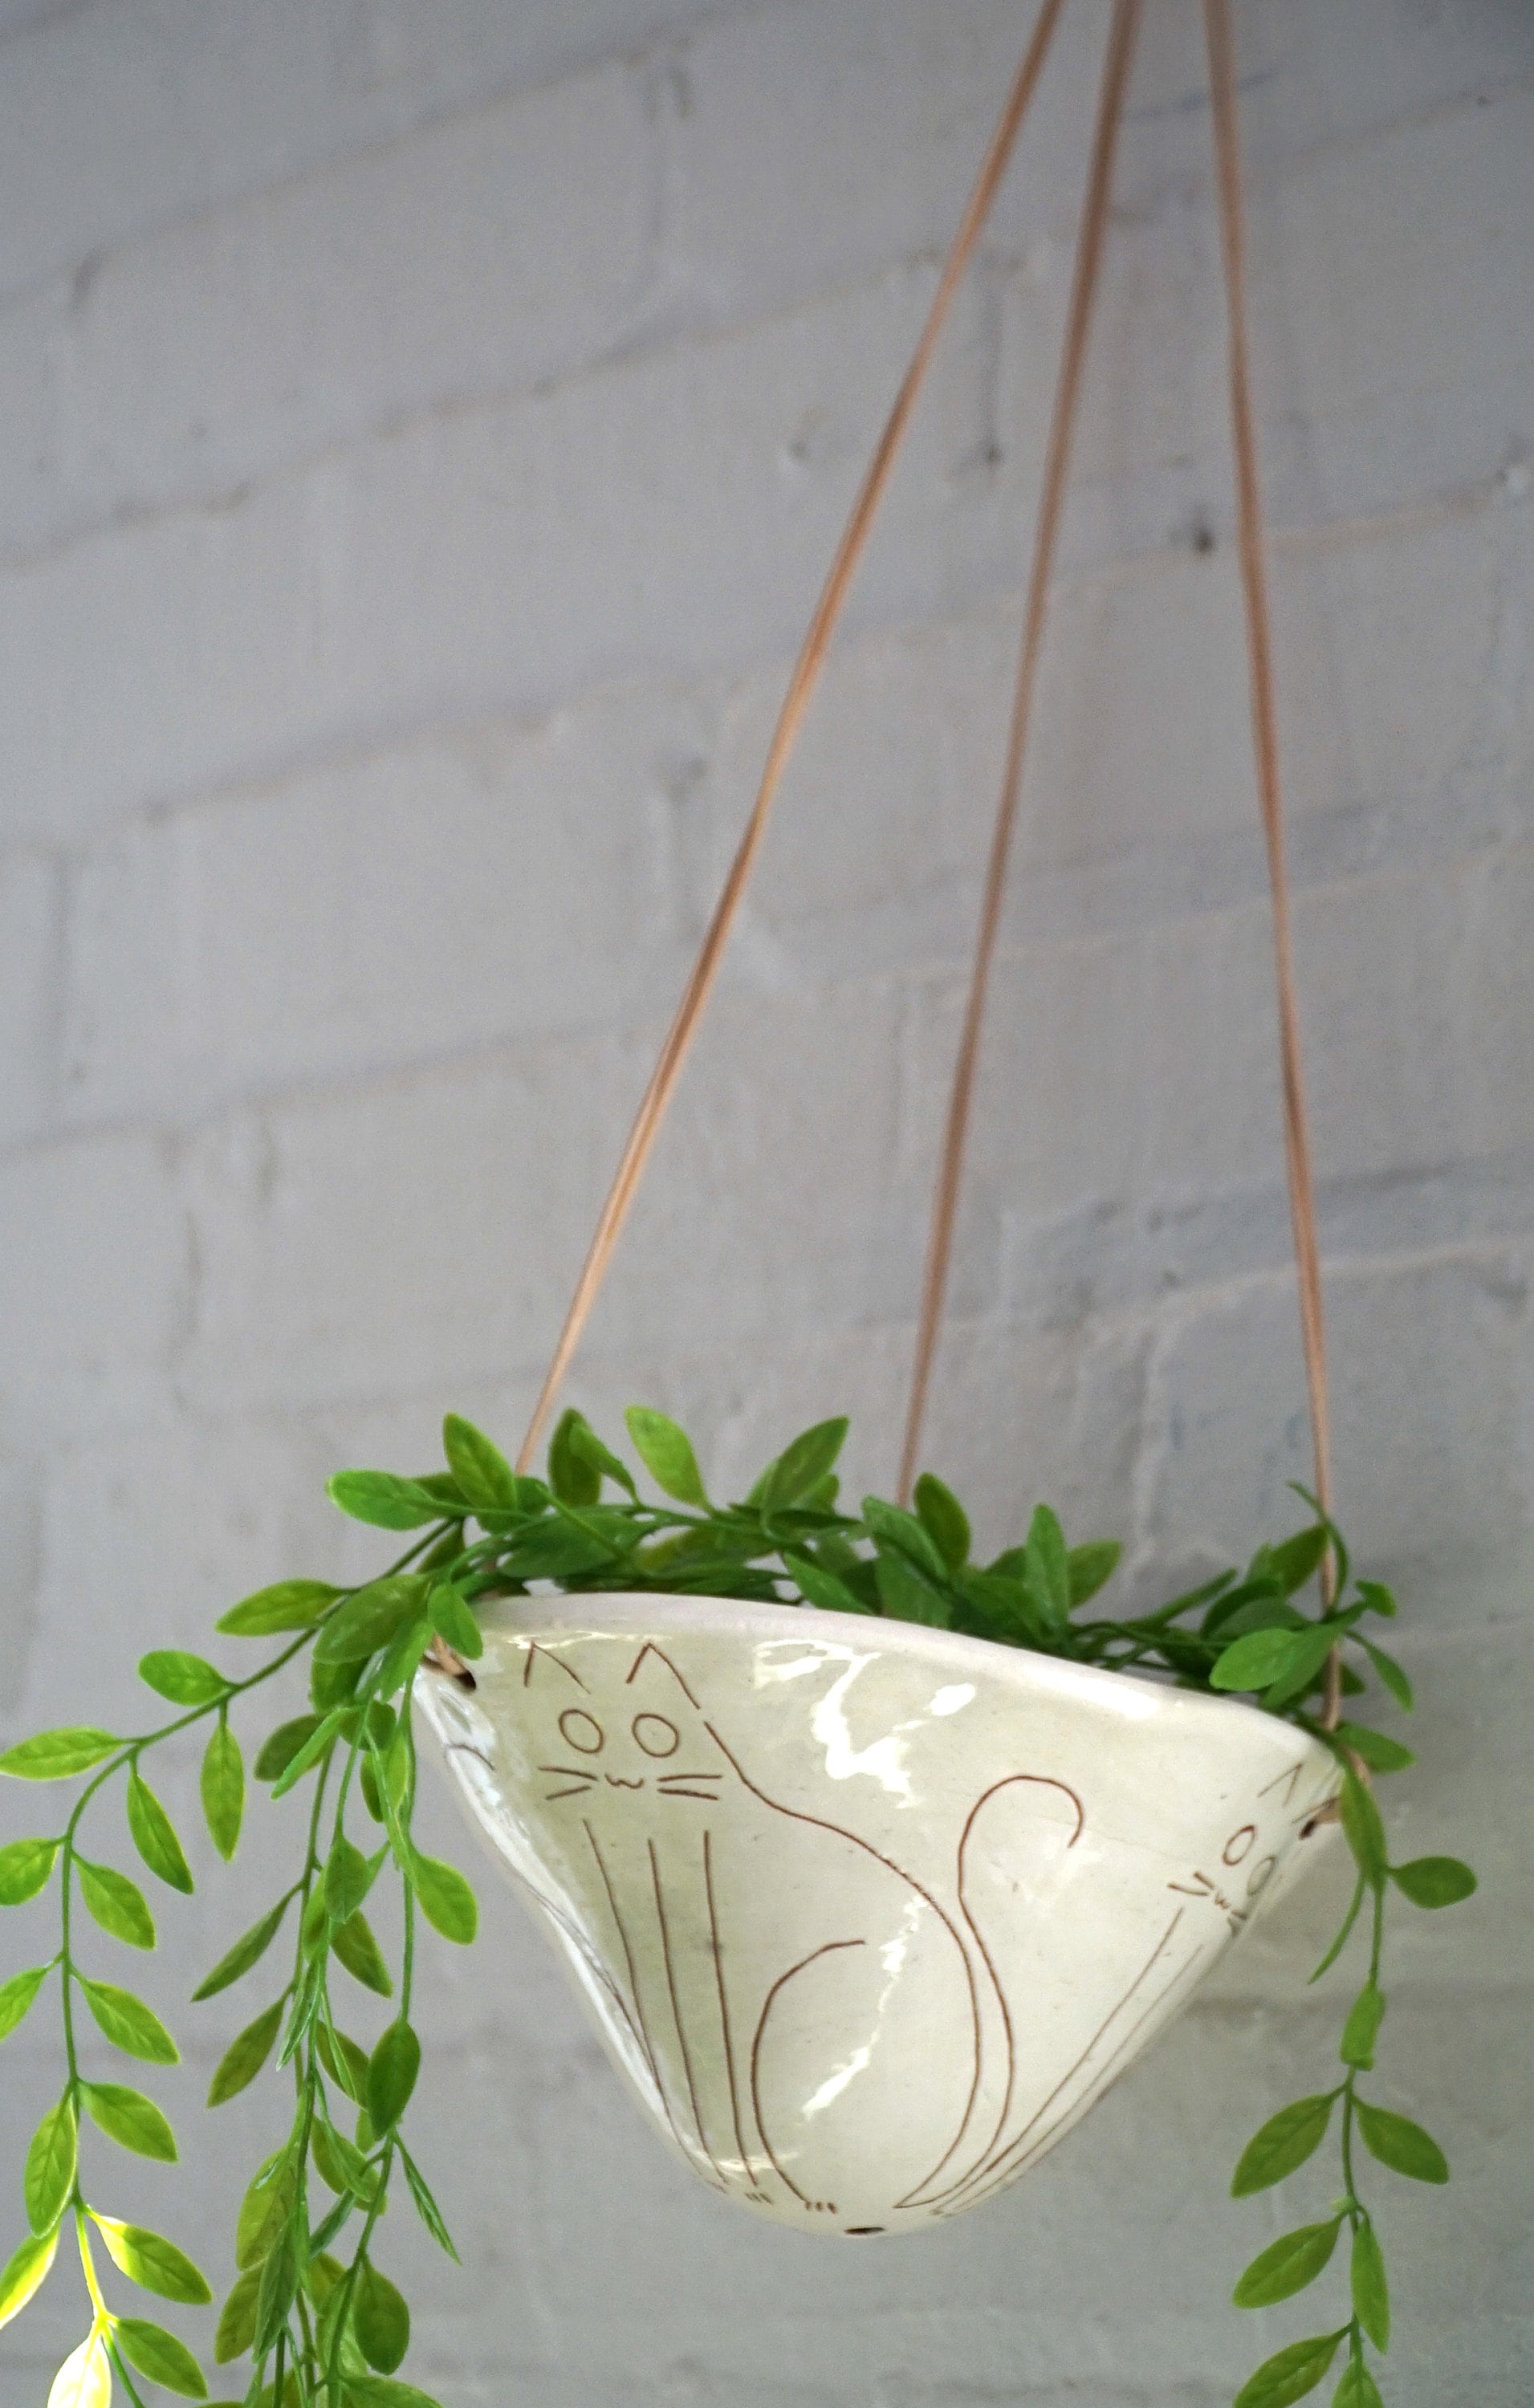 White & Terracotta Hanging Planter w/ "Kitty" Design - Hanging Pot w/ Carved Design - Succulent, Cactus, Herb, Air Plant - Home Decor